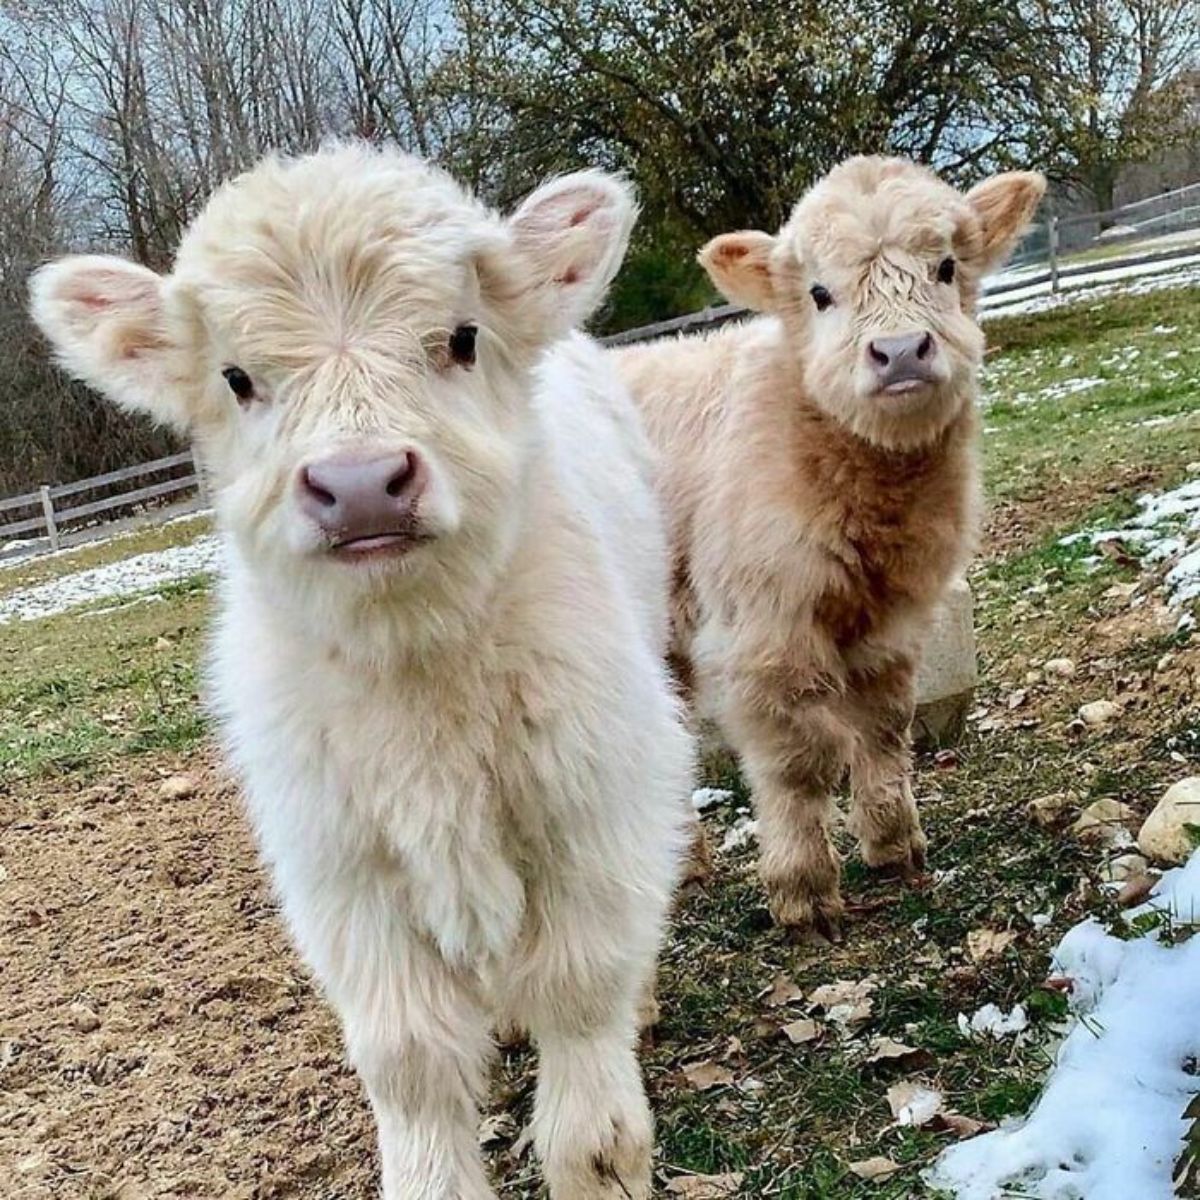 white calf and a brown calf standing together